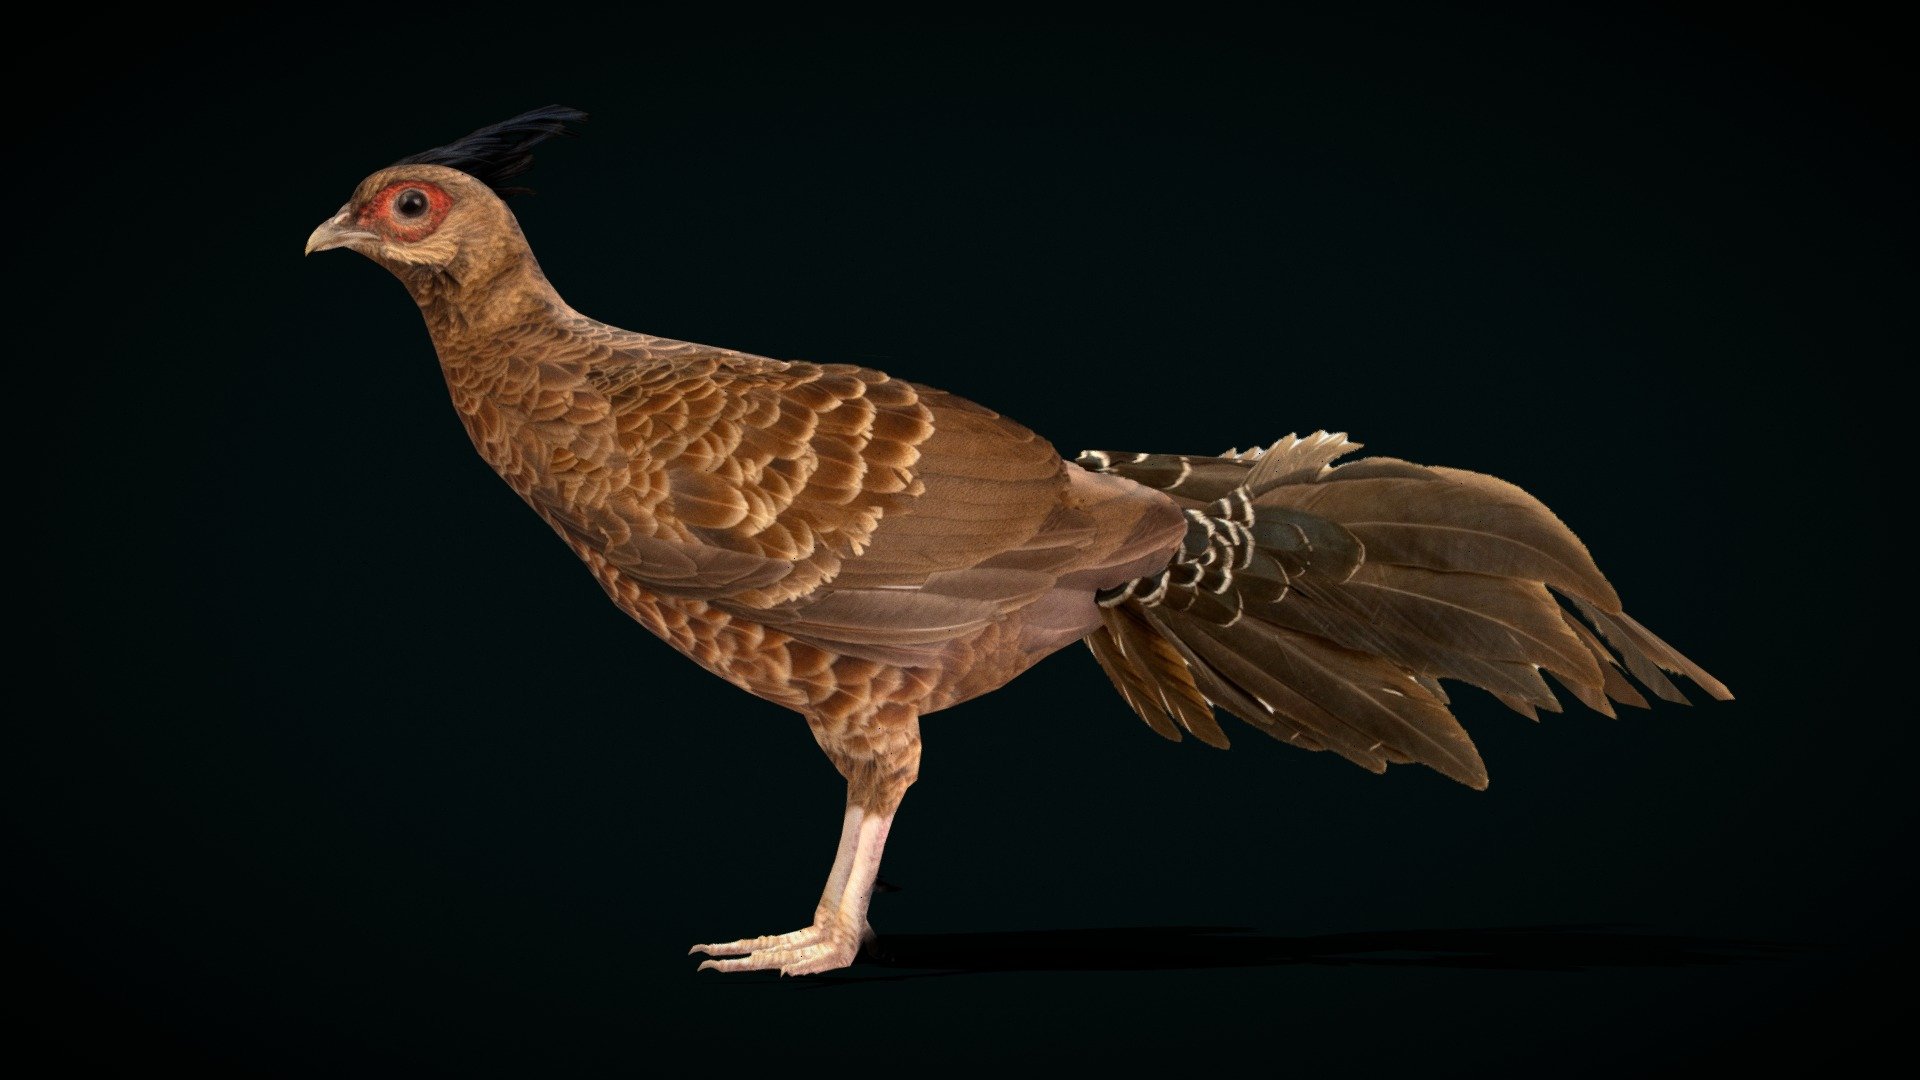 Nepal Kalij pheasant Pose FBX original File




Nepal kalij pheasant (kalij_pheasant,Simply_Kaliji)  Nepal.

Lophura _leucomelanos Animal Bird    (Animalia)  

1 Draw Calls

Low Poly

4K PBR Textures Material 

Unreal FBX (Unreal 4,5 Plus)

USDZ File (AR Ready). Real Scale Dimension

Textures Files

GLB File (Unreal 5.1  Plus Native Support)


Gltf File ( Spark AR, Lens Studio(SnapChat) , Effector(Tiktok) , Spline, Play Canvas,Omiverse ) Compatible




Triangles : 6666



Vertices  : 3605

Faces     : 3380

Edges     : 6970

Diffuse, Metallic, Roughness , Normal Map ,Specular Map,AO

The kalij pheasant, or simply kalij, is a pheasant found in forests and thickets, especially in the Himalayan foothills, from Nepal, Pakistan to western Thailand. Wikipedia
Scientific name: Lophura_leucomelanos
Conservation status: Least Concern (Population decreasing) Encyclopedia of Life
Family: Phasianidae
Domain: Eukaryota
Kingdom: Animalia
Order: Galliformes
Phylum: Chordata - Nepal Kalij Pheasant Bird (Lowpoly) - Buy Royalty Free 3D model by Nyilonelycompany 3d model